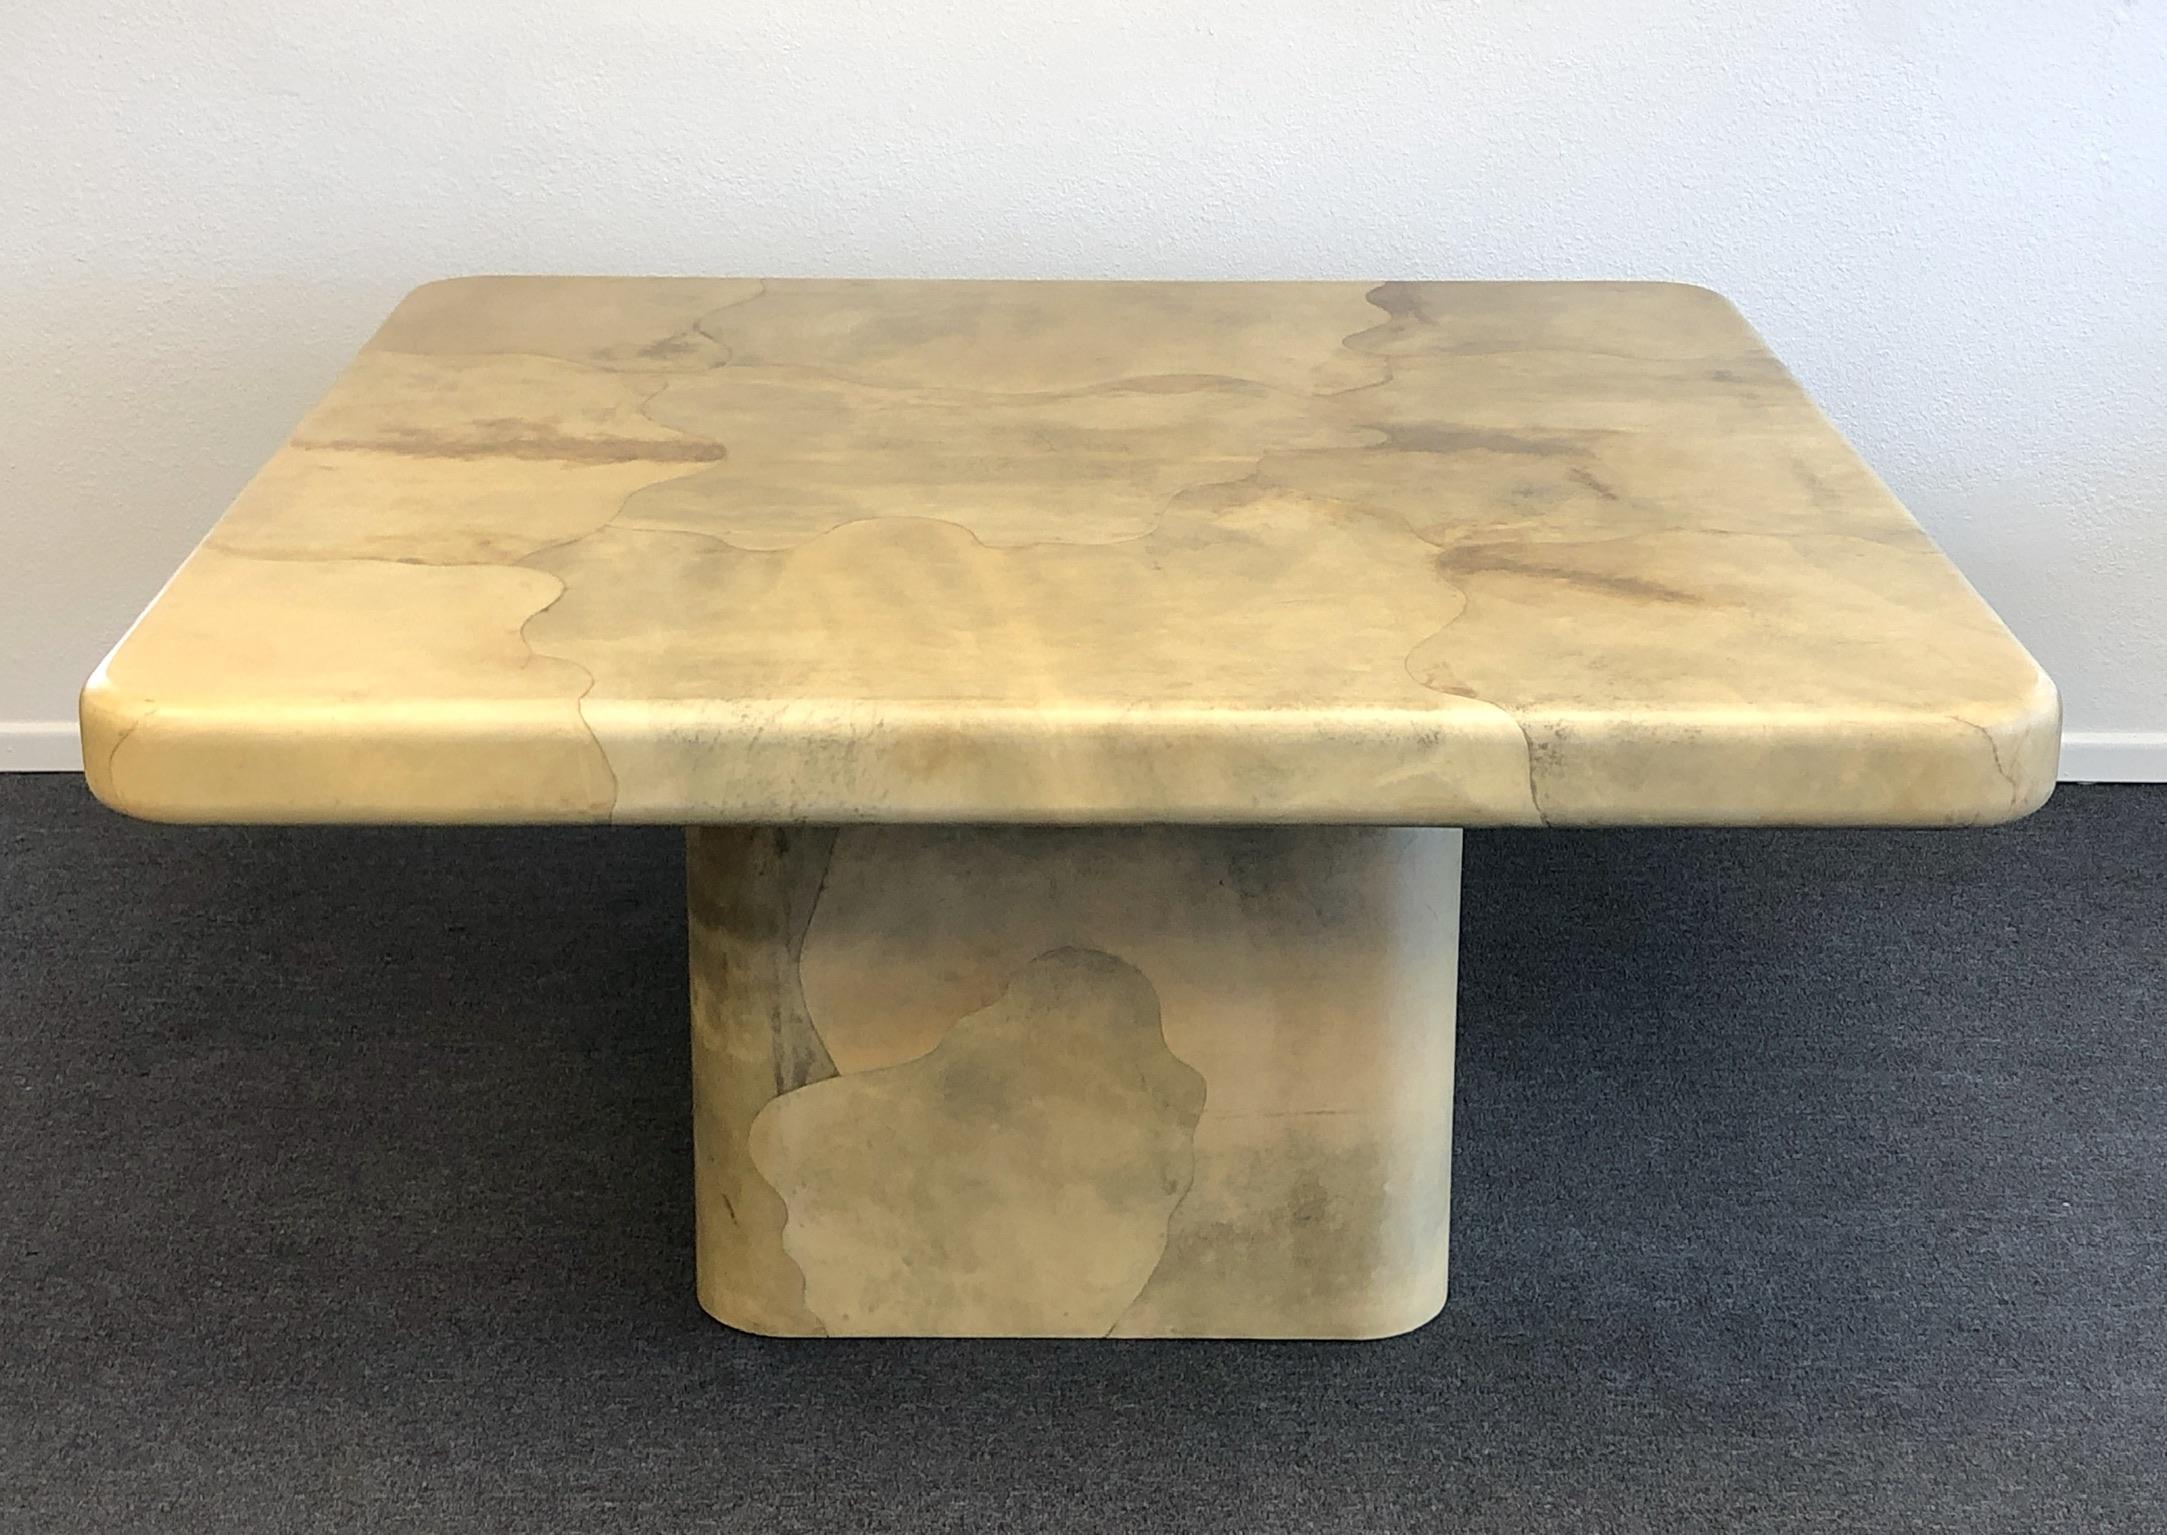 A amazing goatskin dining table design by renowned designer Karl Springer in the 1980s. The table it’s constructed of wood that’s covered in goatskin and then lacquered. The tops underside is covered in goatskin also. The table is in beautiful